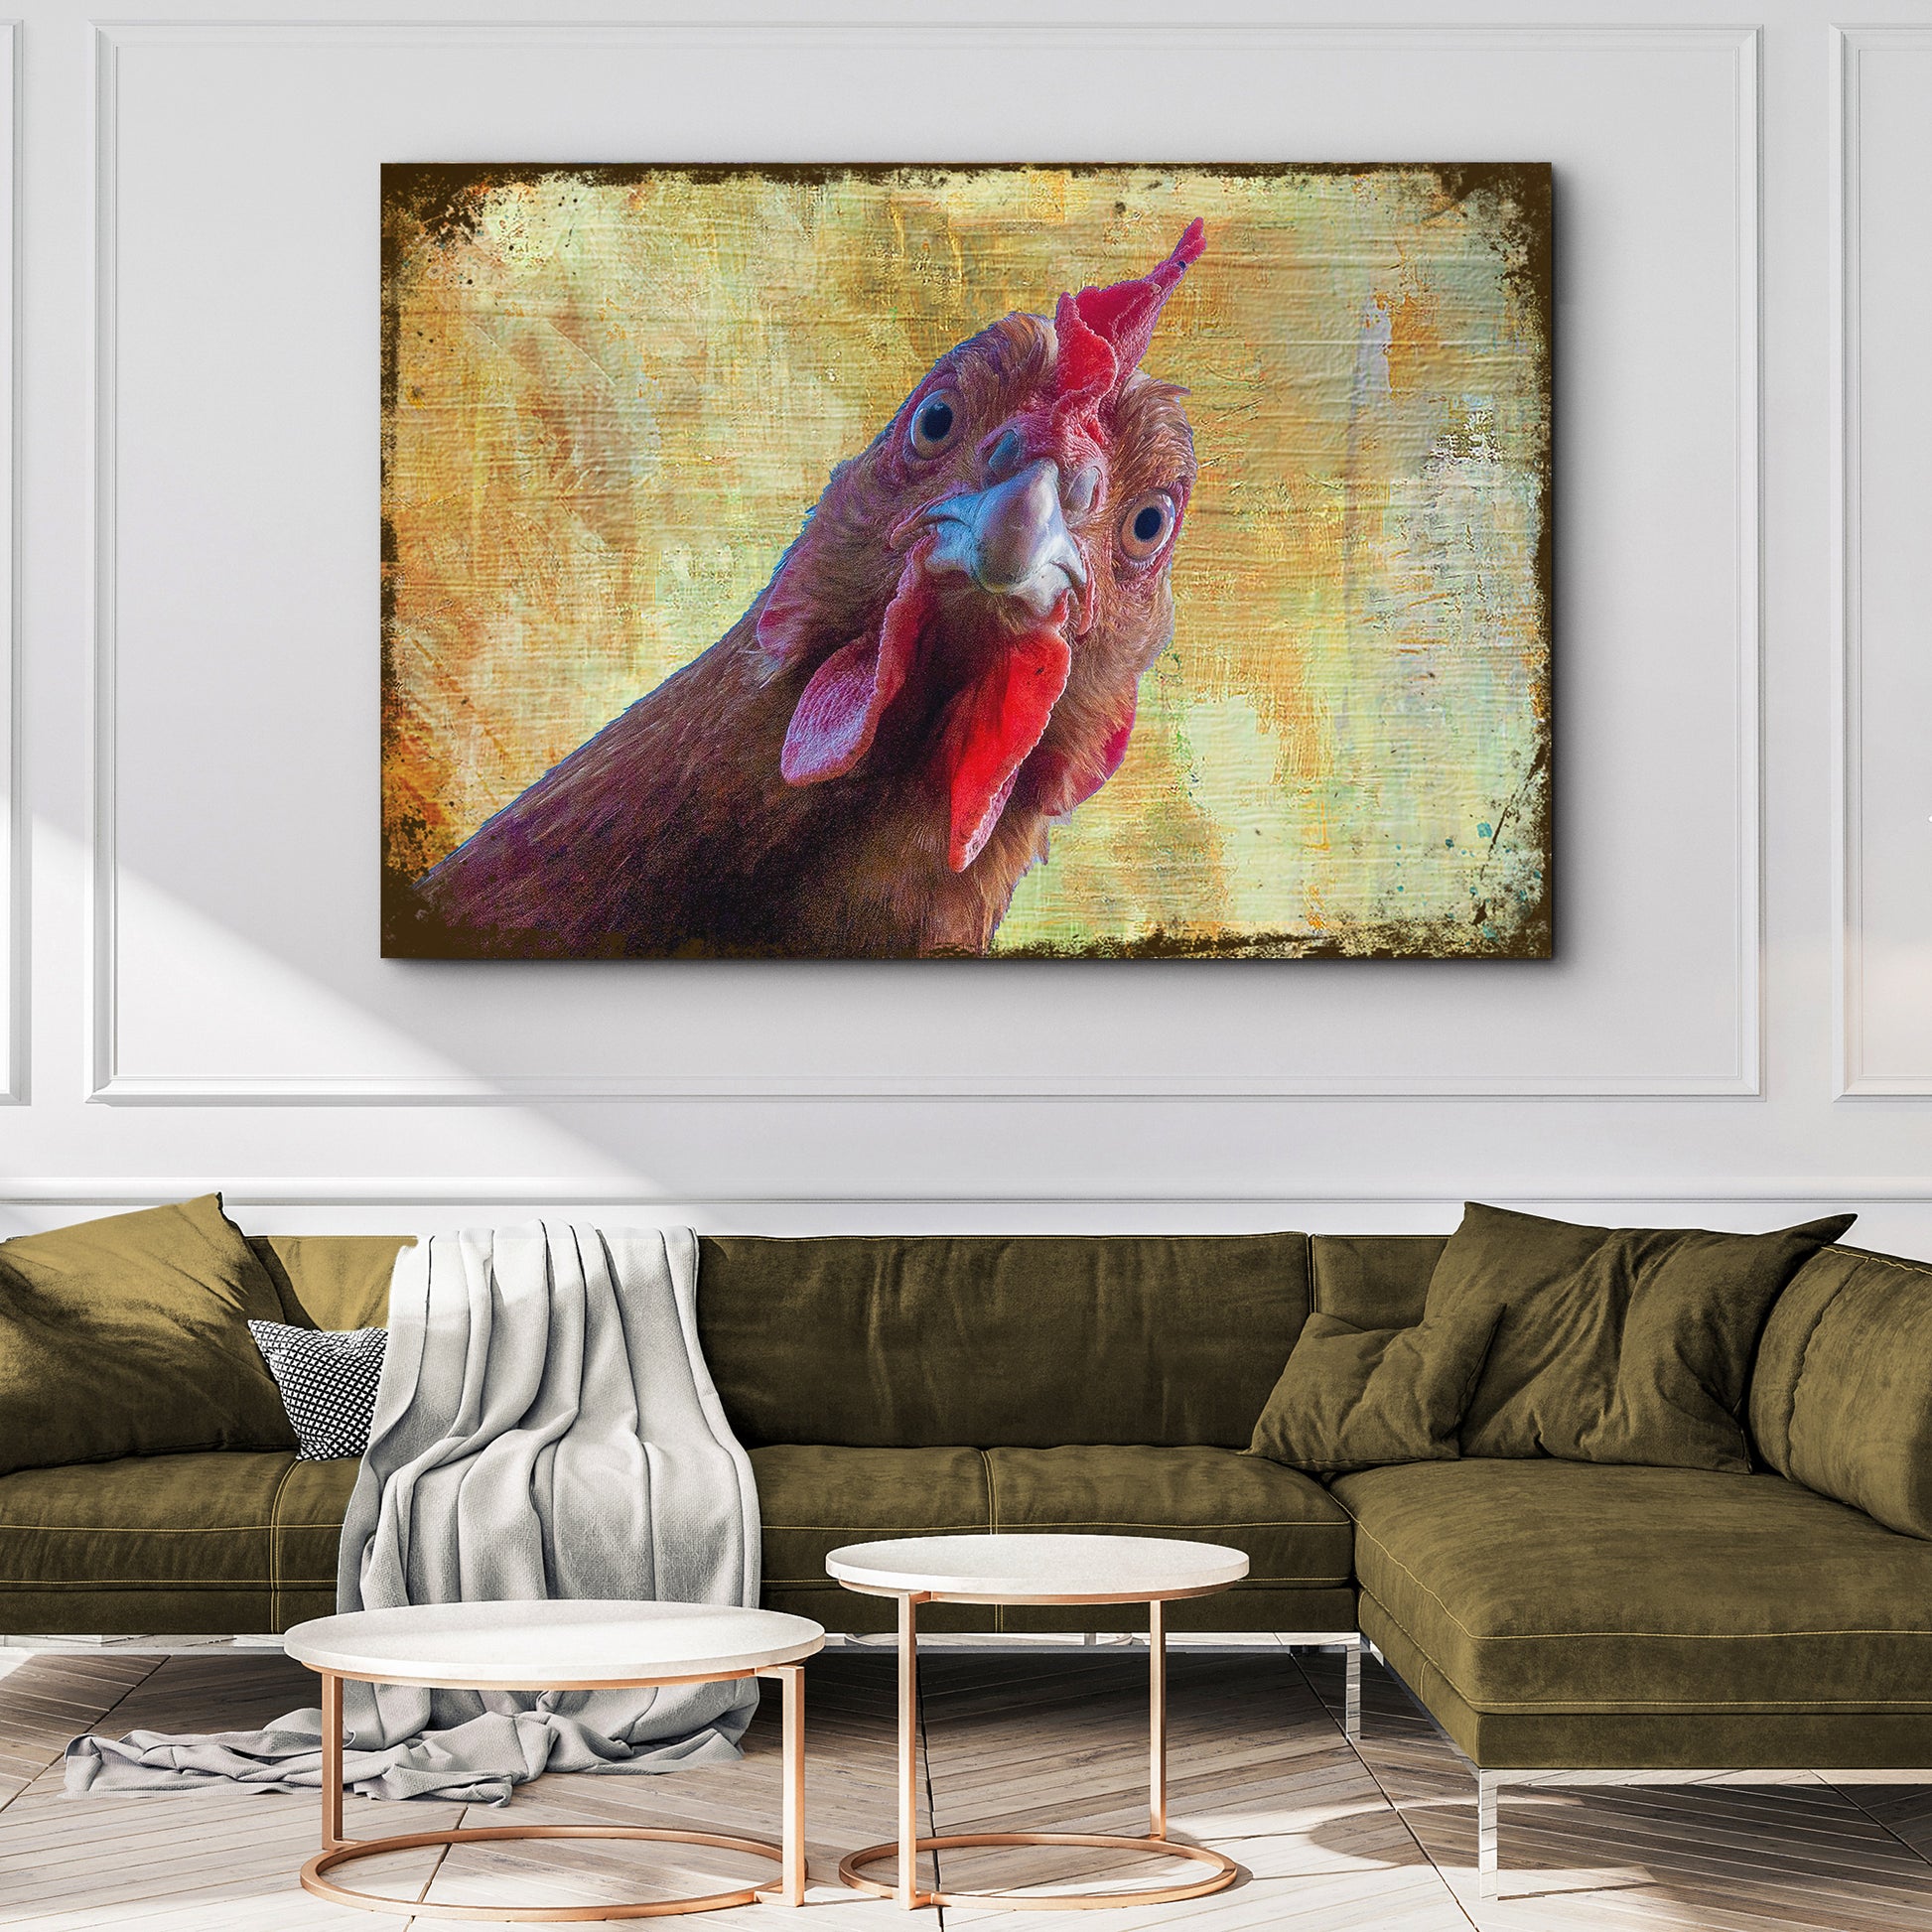 Curious Chicken Canvas Wall Art Style 2 - Image by Tailored Canvases